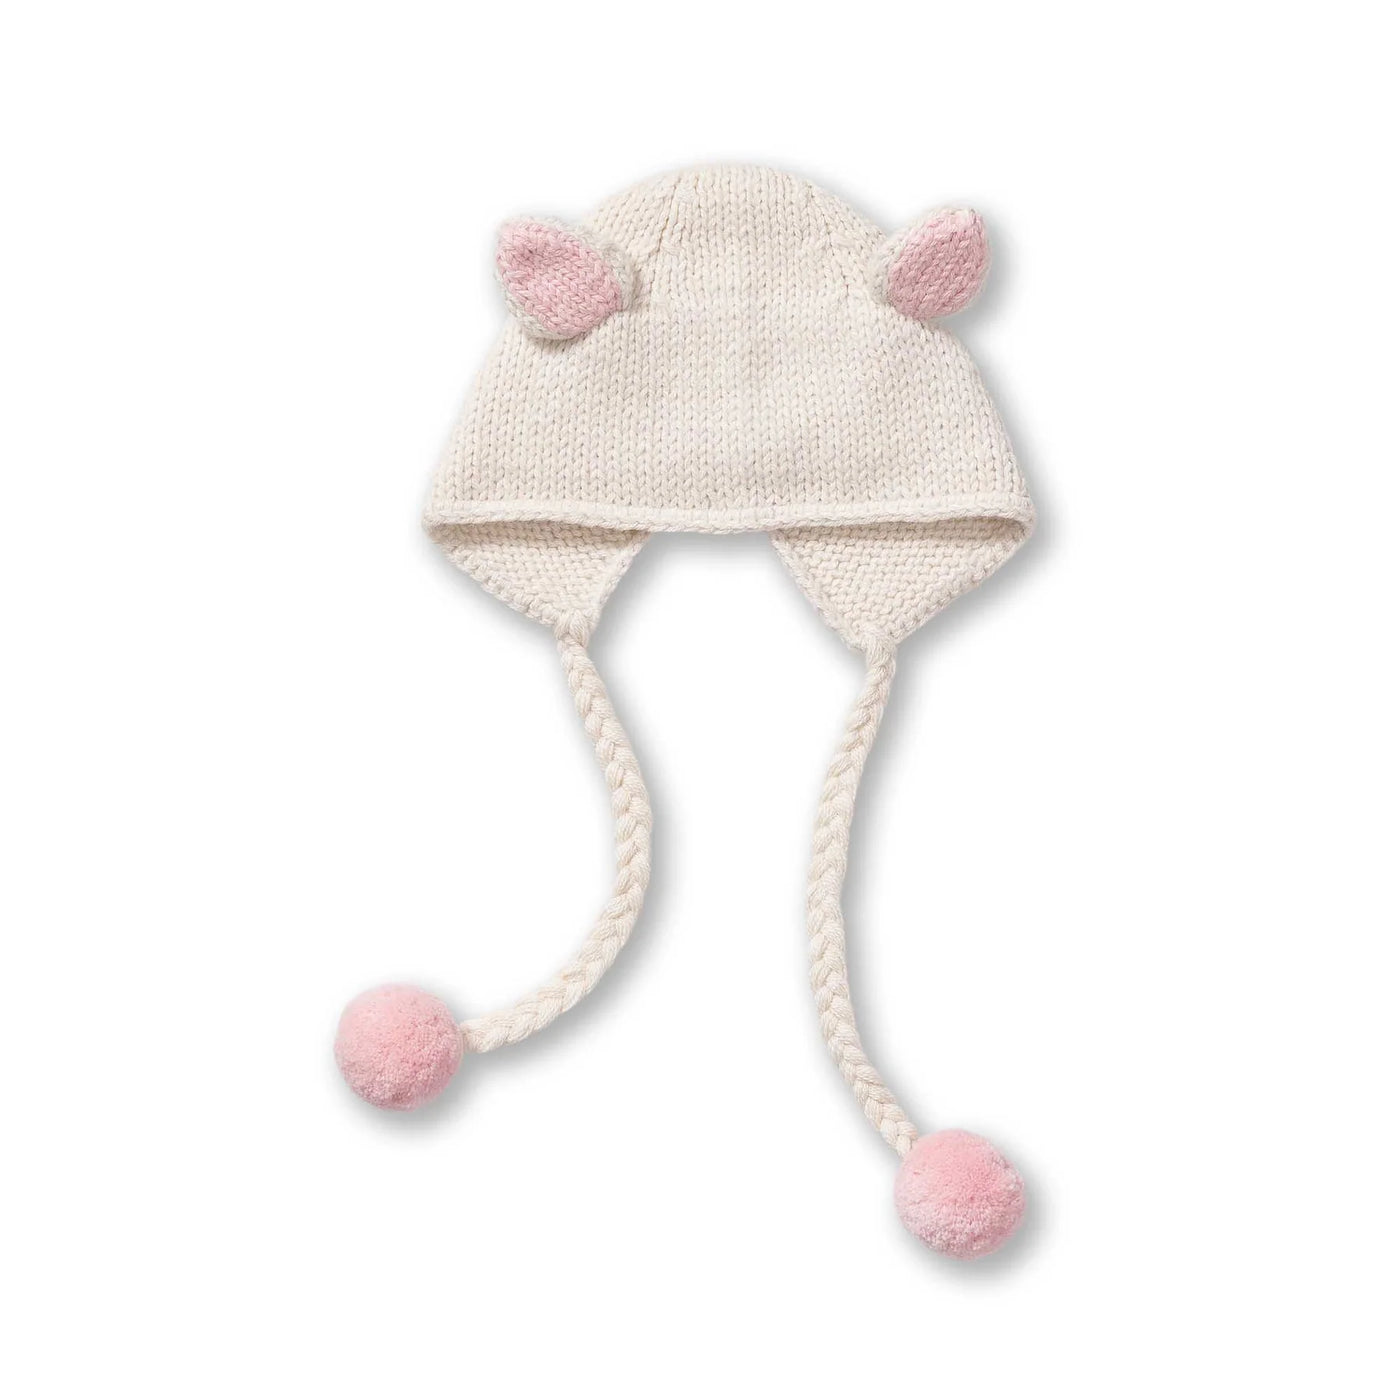 ALICIA ADAMS BUNNY HAT BABY (Available in 4 Sizes and 3 Colors)